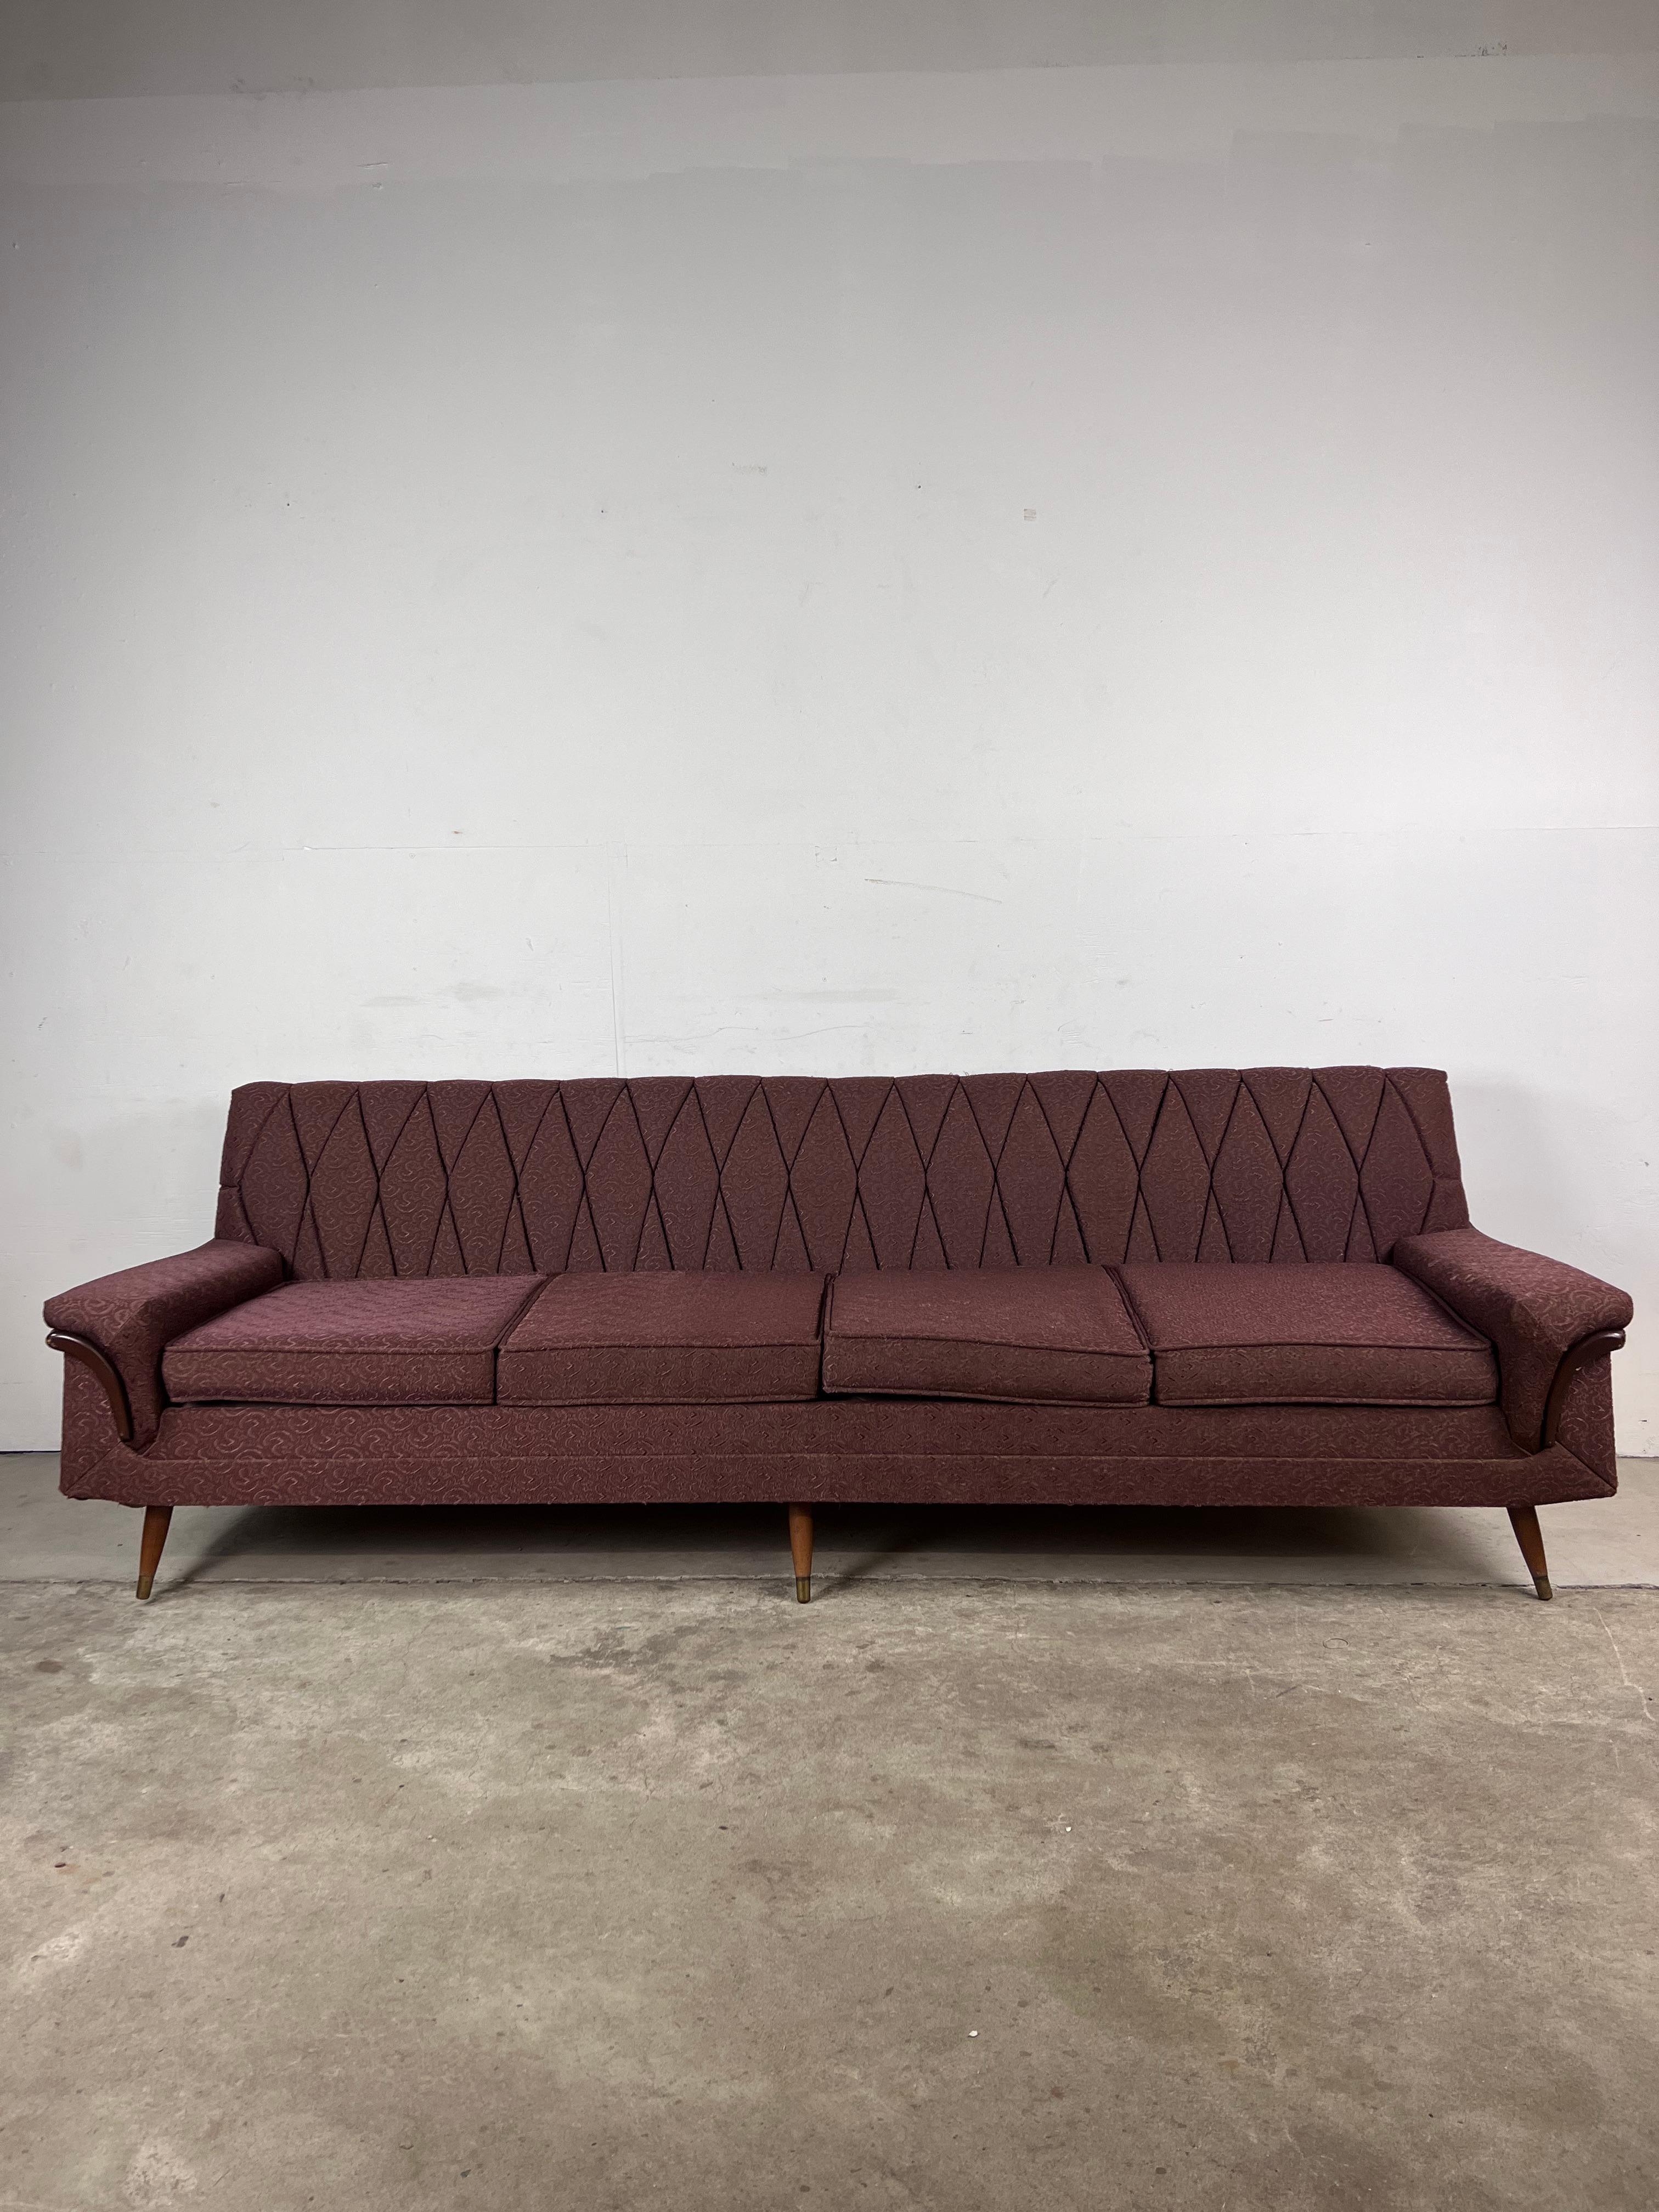 This mid century modern sofa features hardwood frame, original brown upholstery, scalloped seat back, removable cushions, broad armrests with walnut accents, and tapered legs with brass capped feet.

Matching lounge chair available separately.

